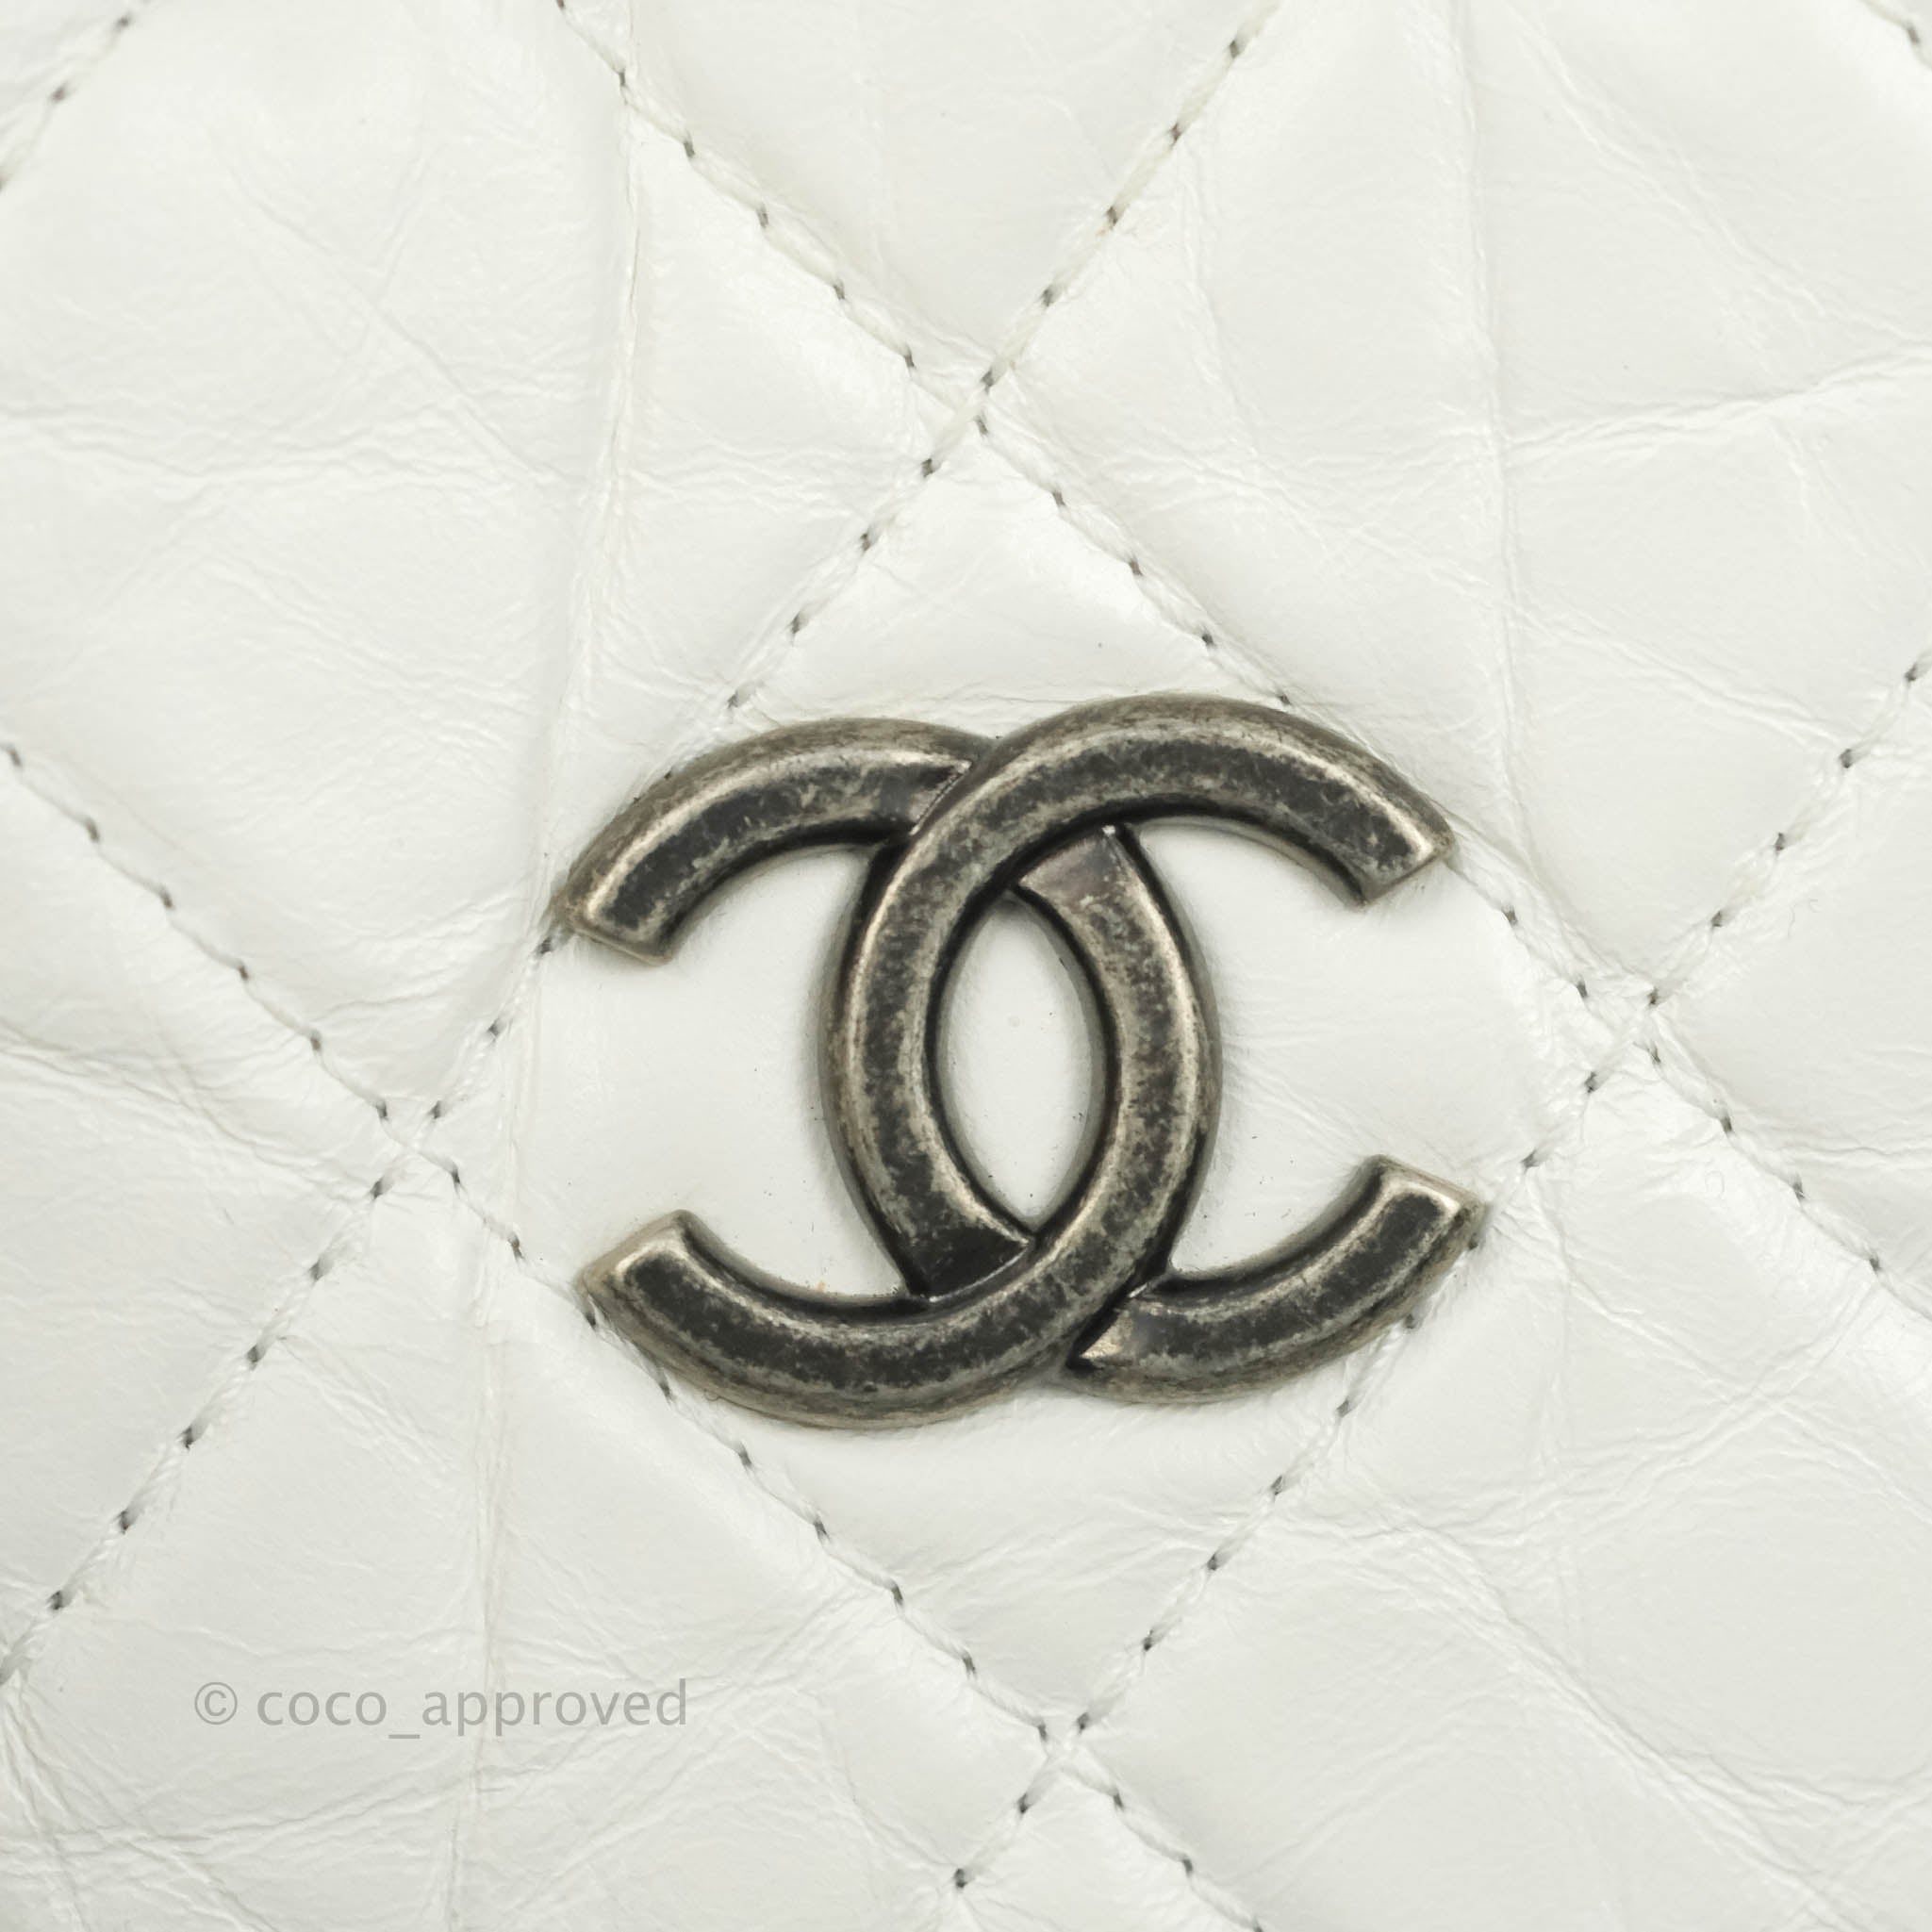 Gabrielle leather backpack Chanel White in Leather - 33681397